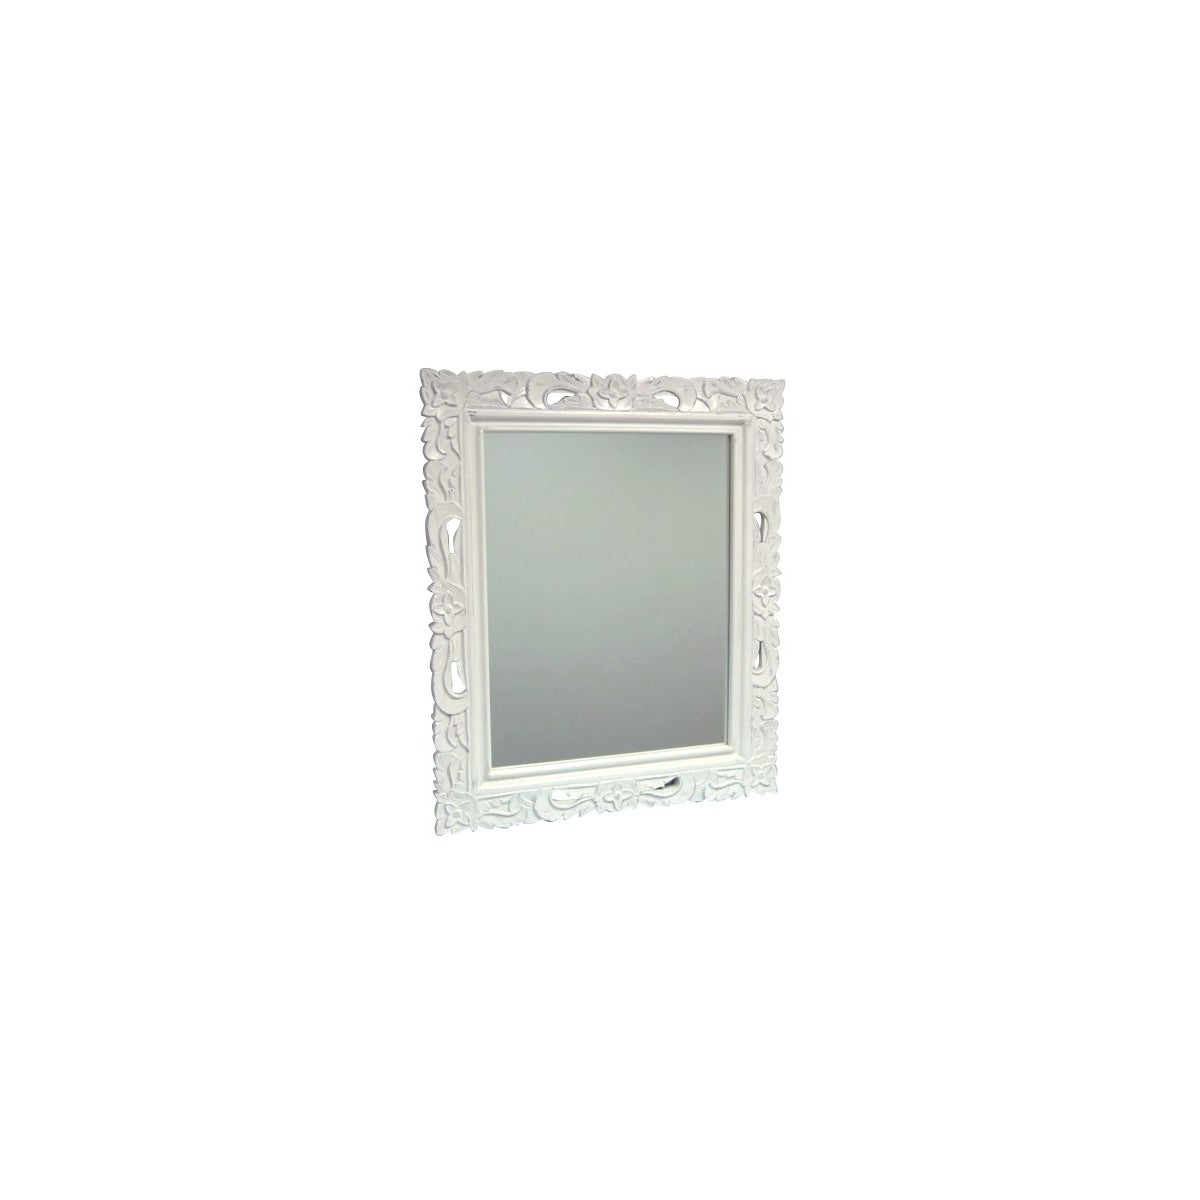 FLORAL CARVED MIRROR - WHT